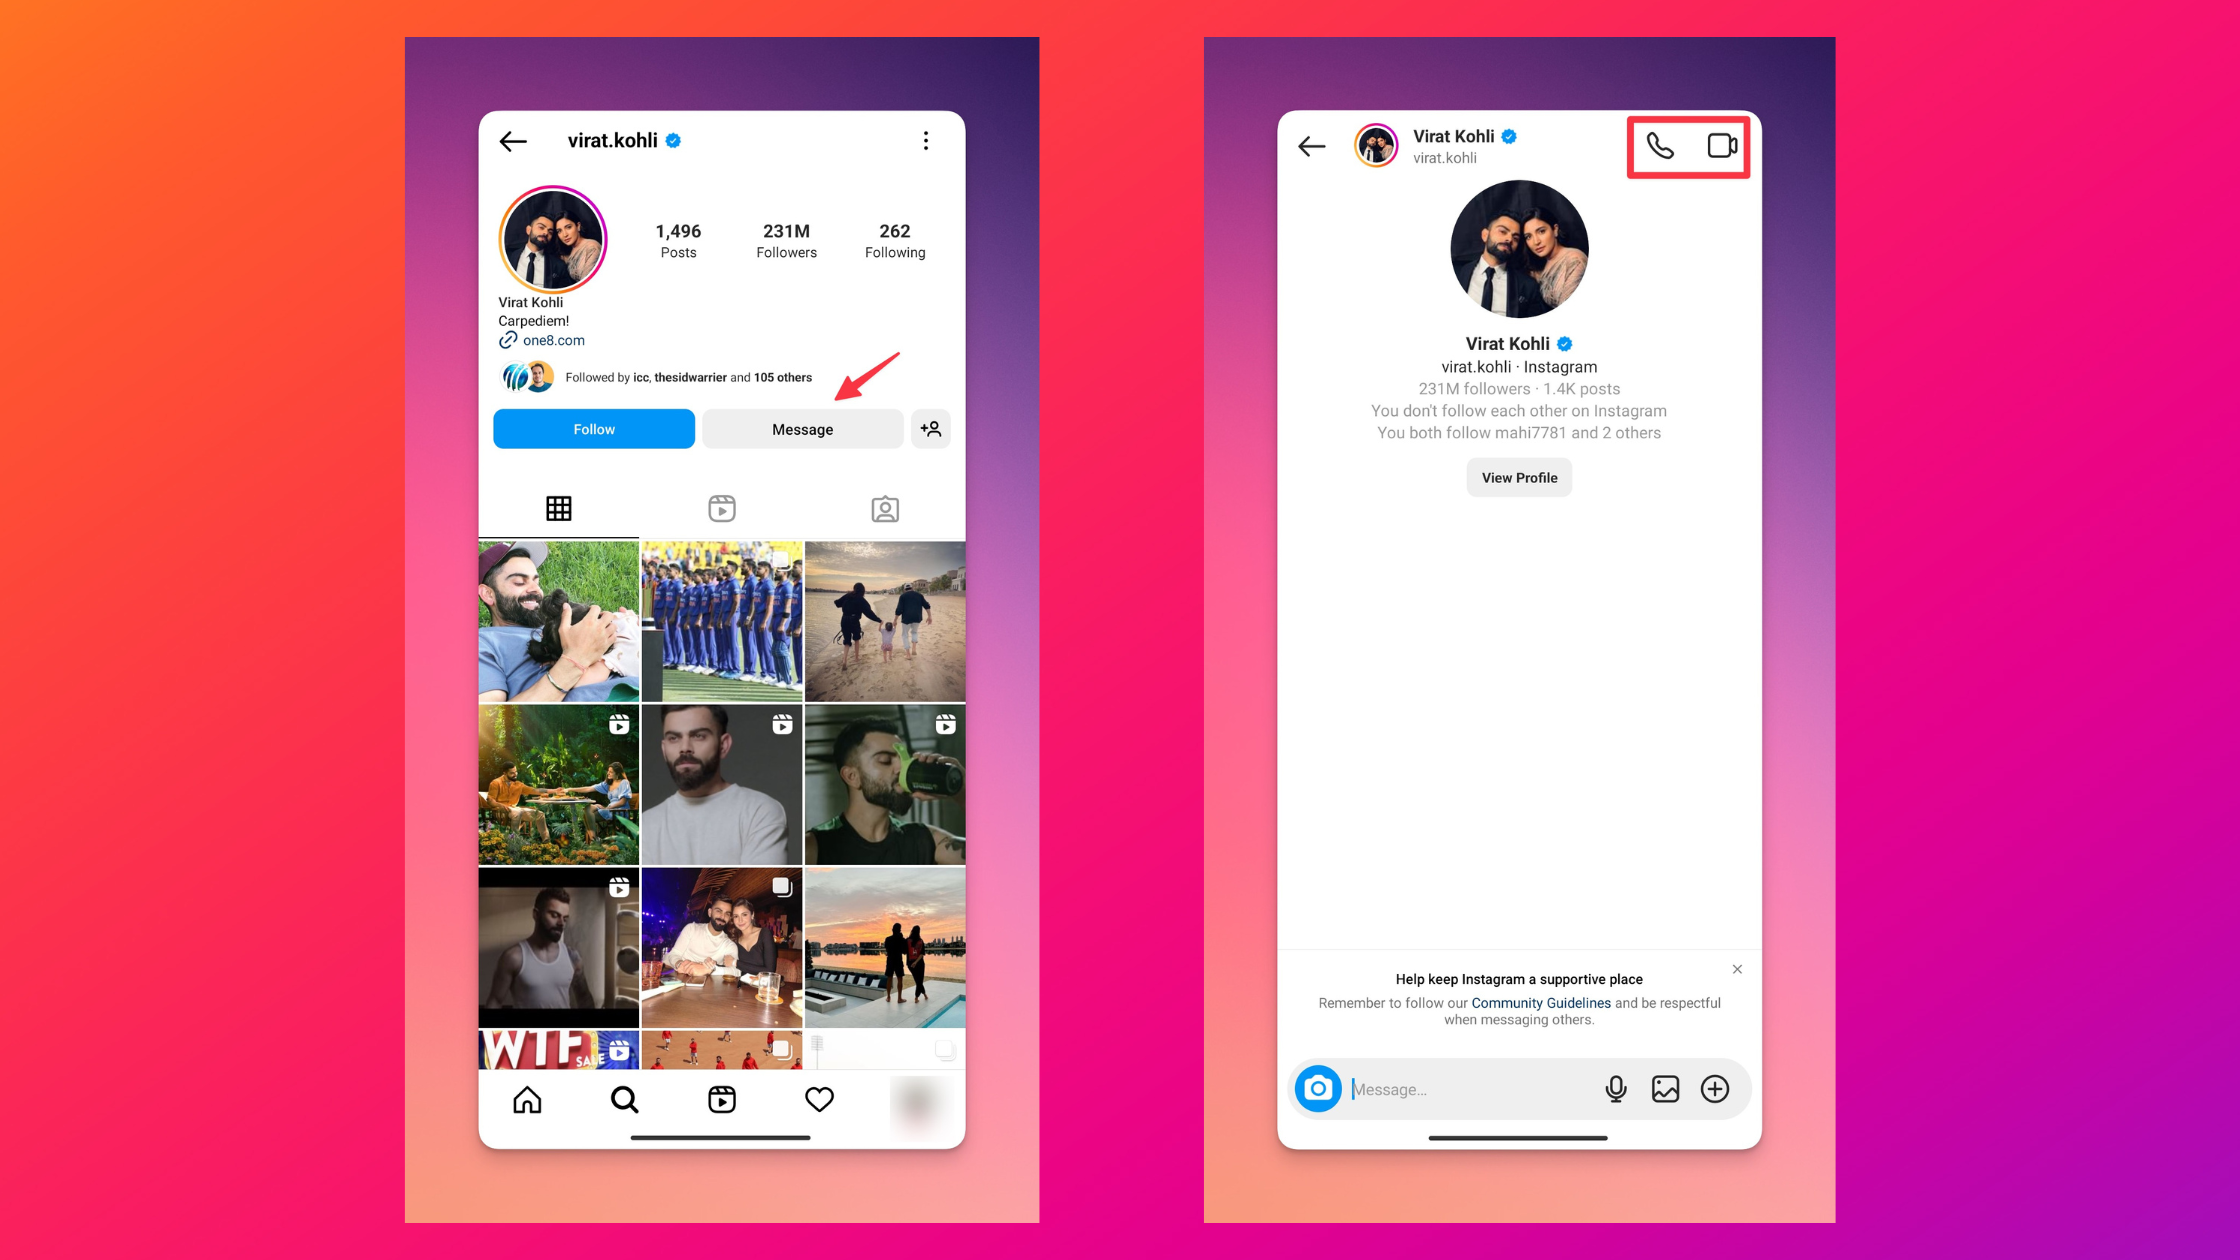 Remote.tools shows that you can call anyone on Instagram. It just have to be a public profile